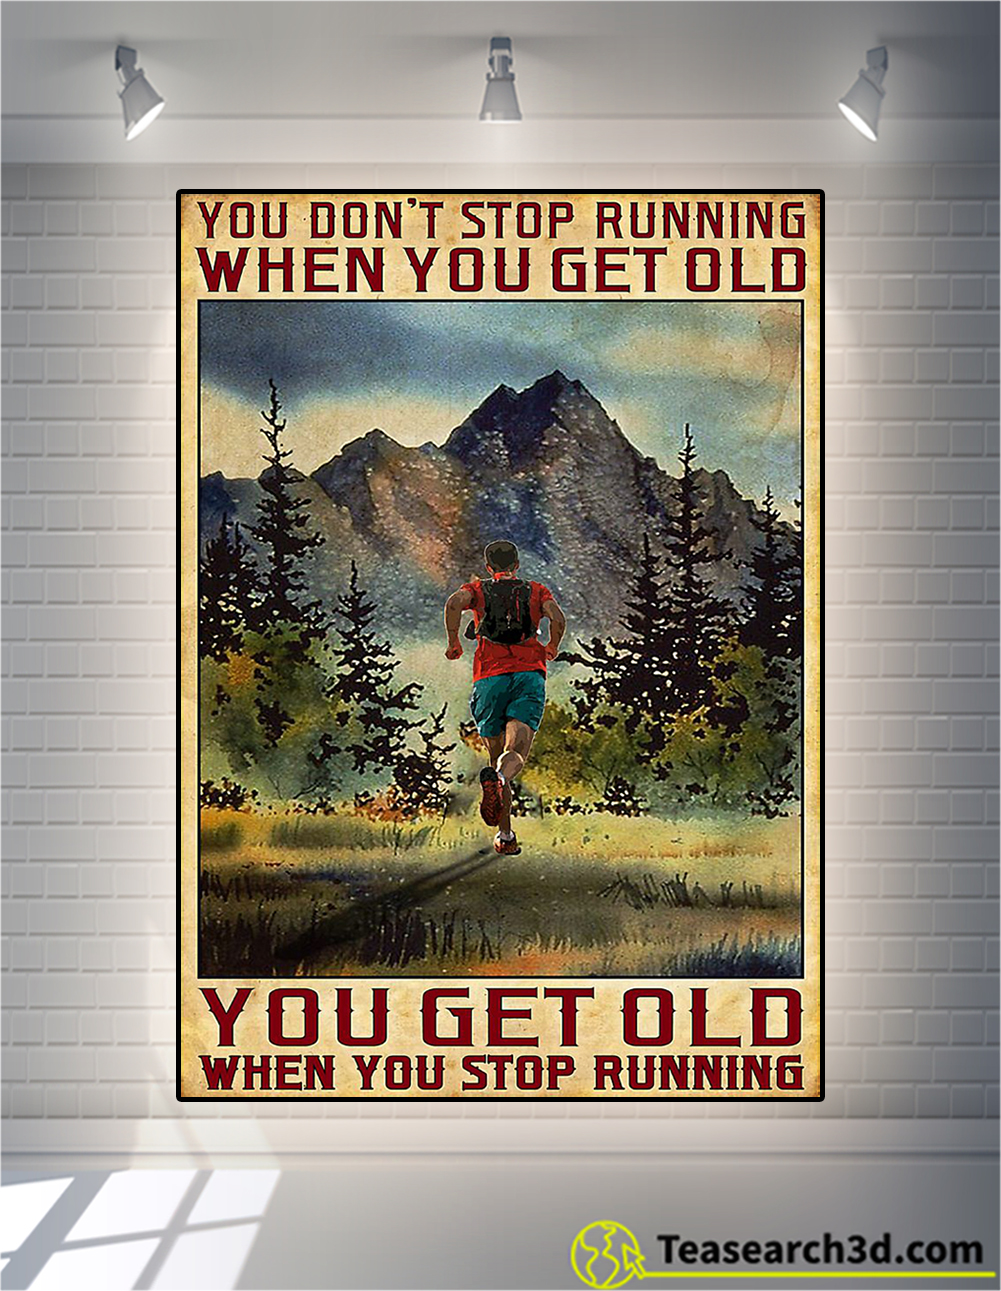 You don’t stop running when you get old poster